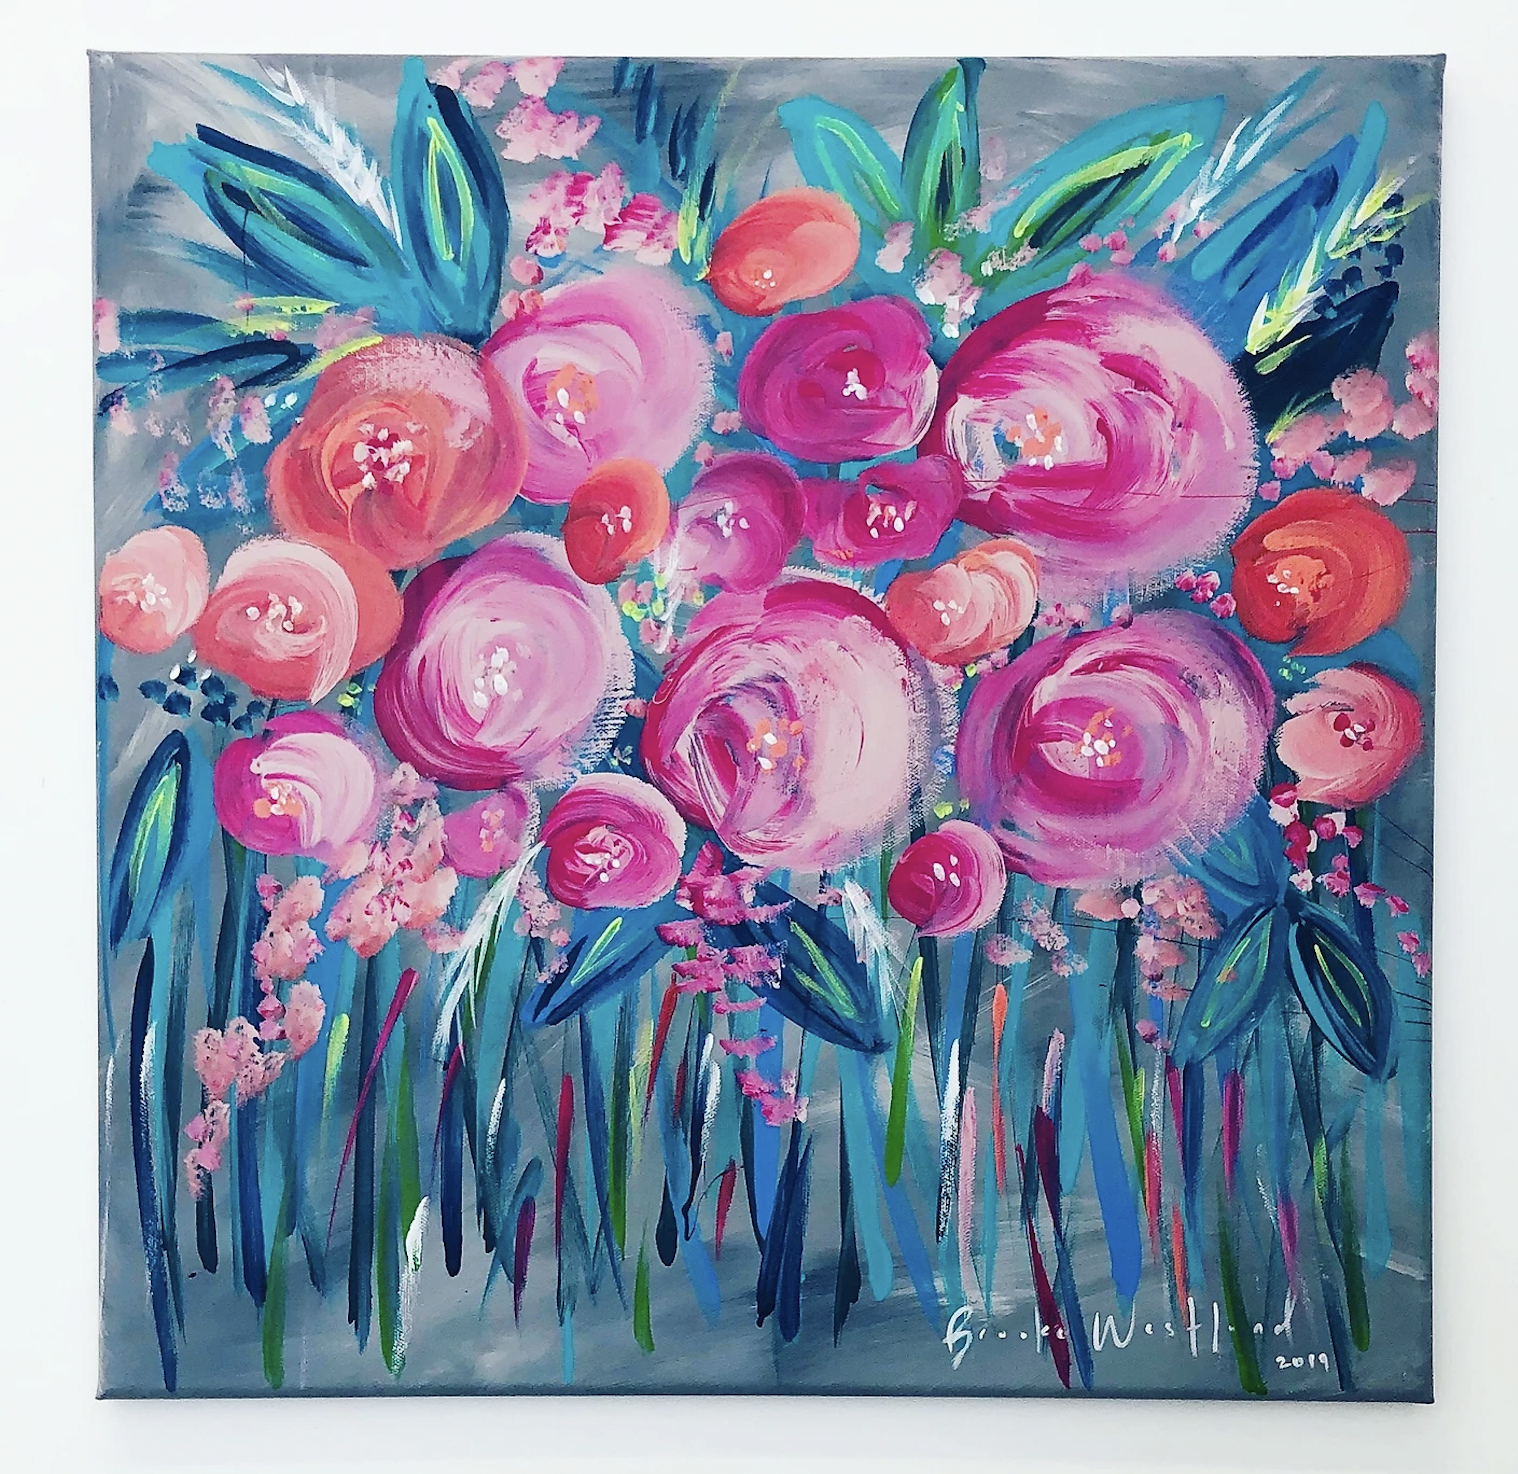 PAINTING CLASS: Floral Painting with Acrylics